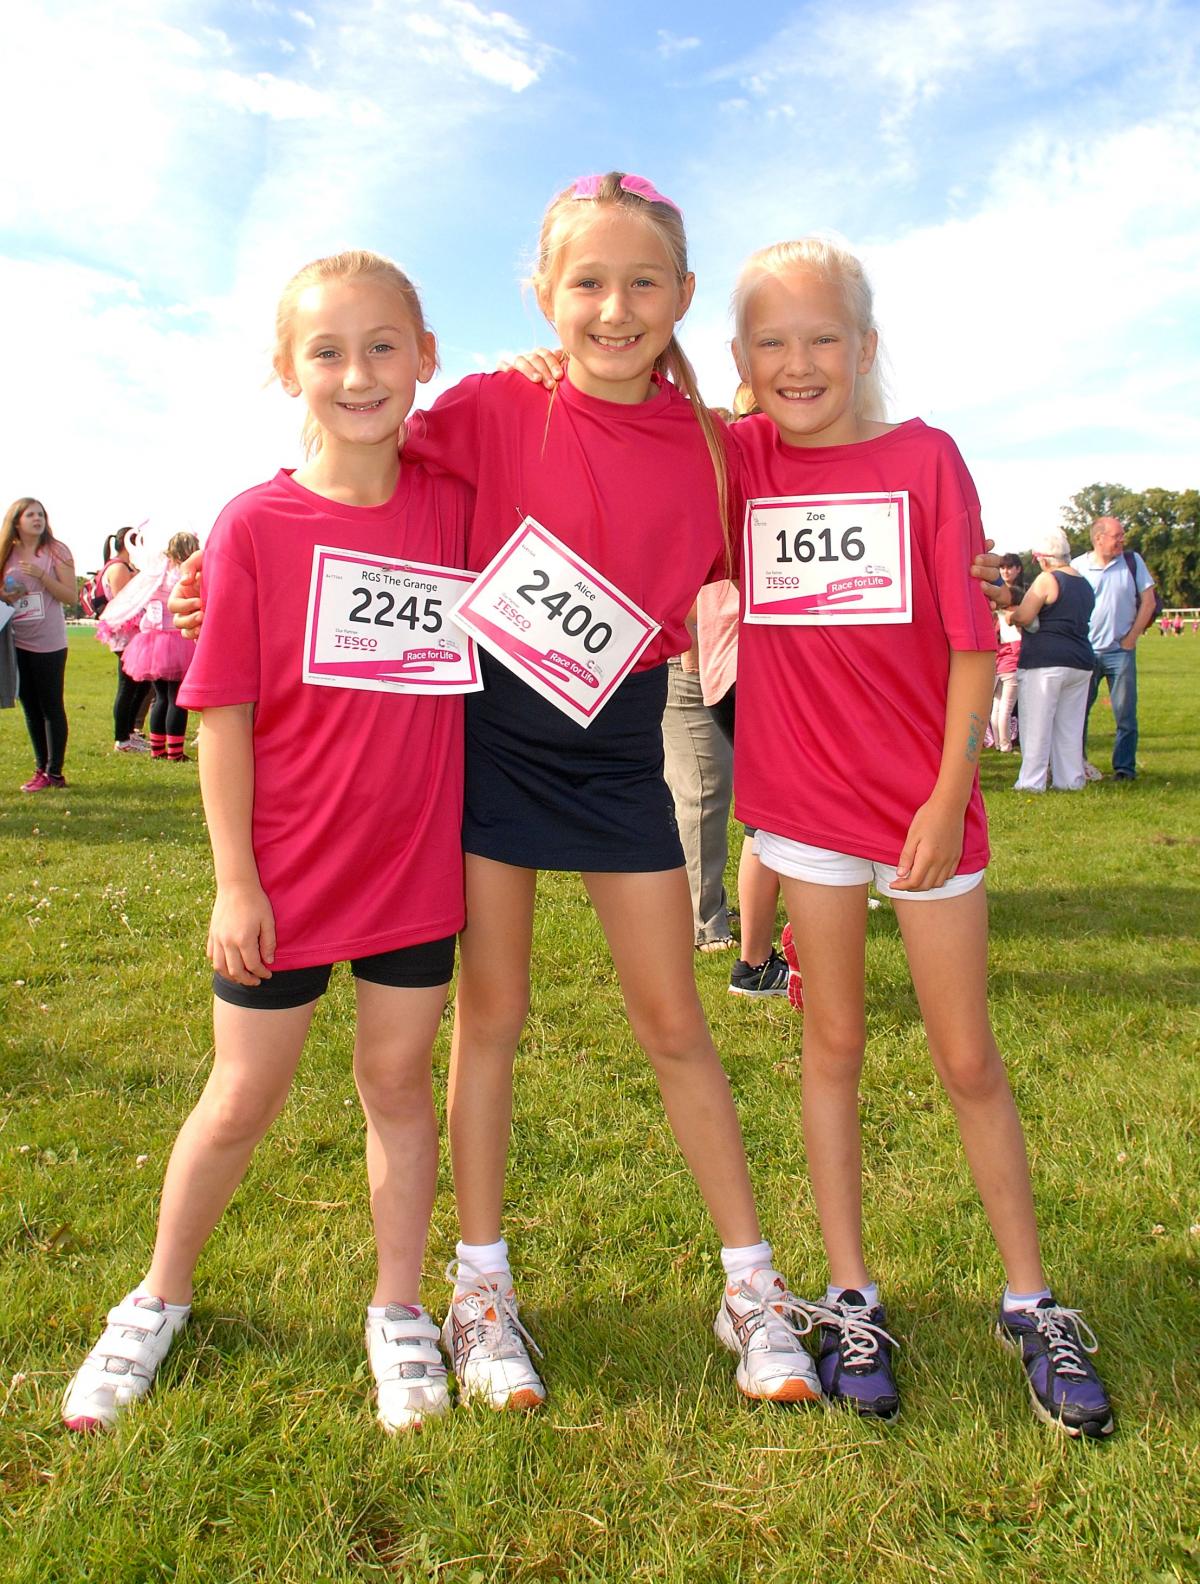 Pictures from the Race For Life 2014 at Pitchcroft, Worcester